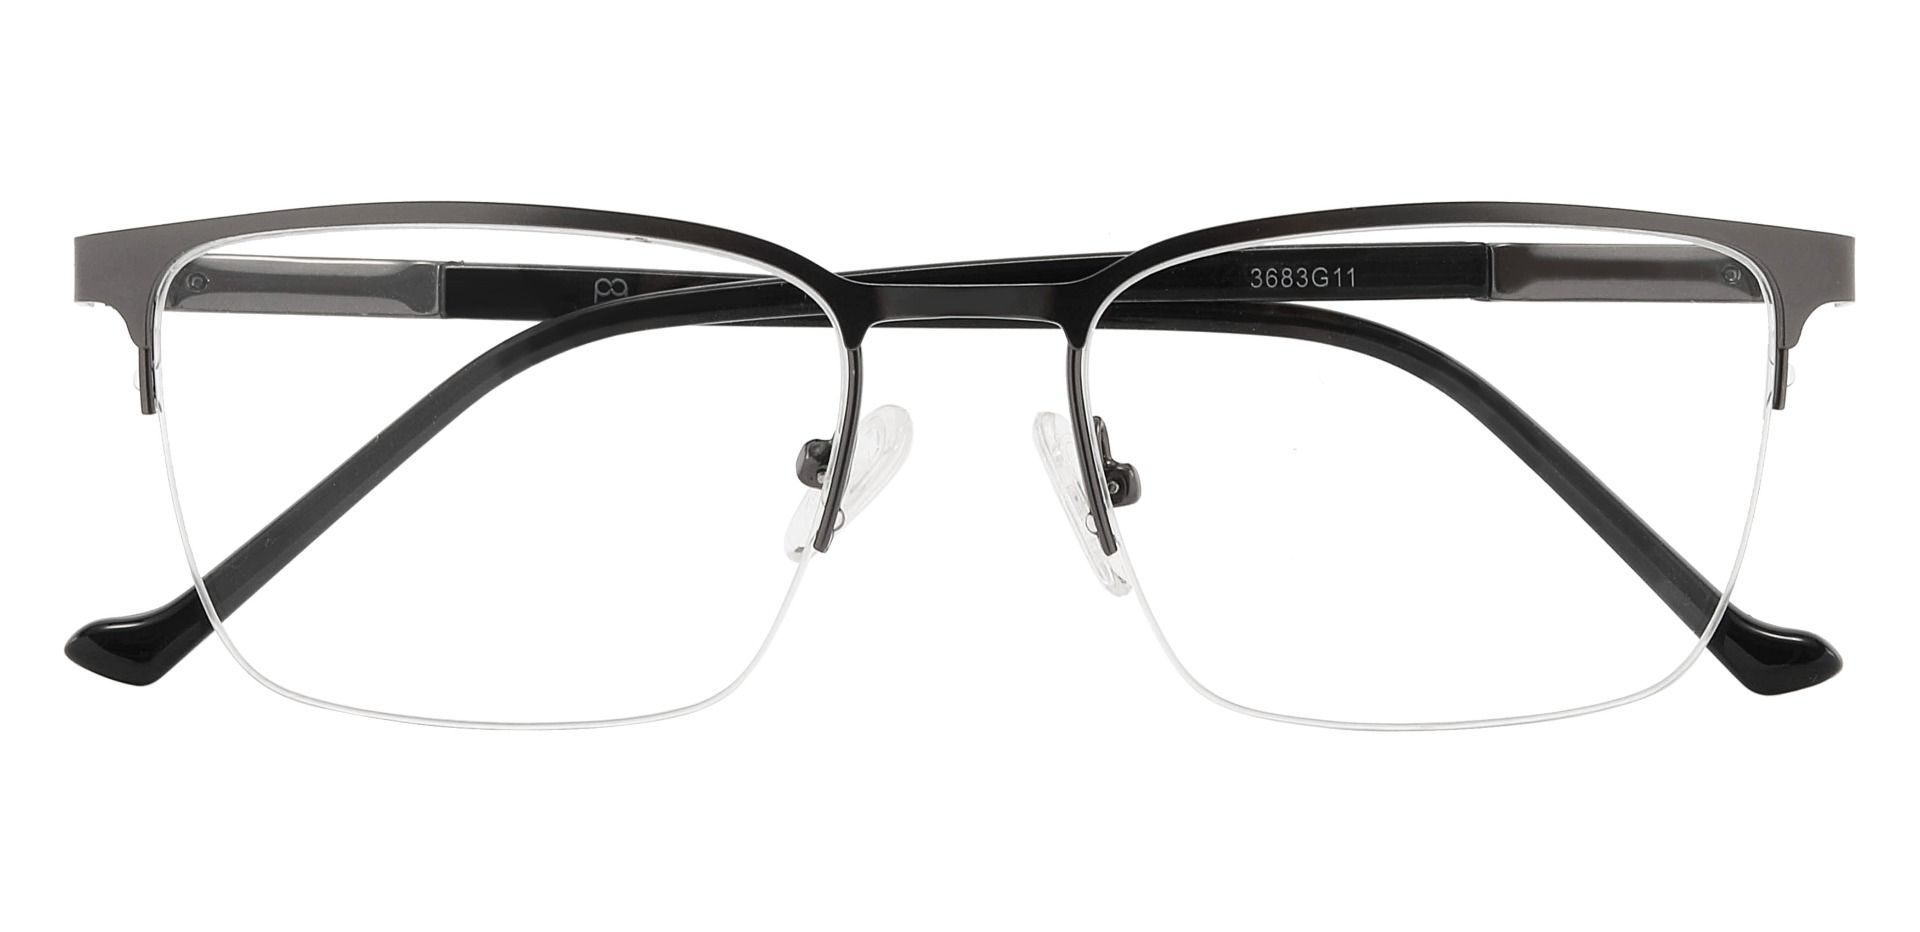 Ludlow Rectangle Lined Bifocal Glasses - Gray